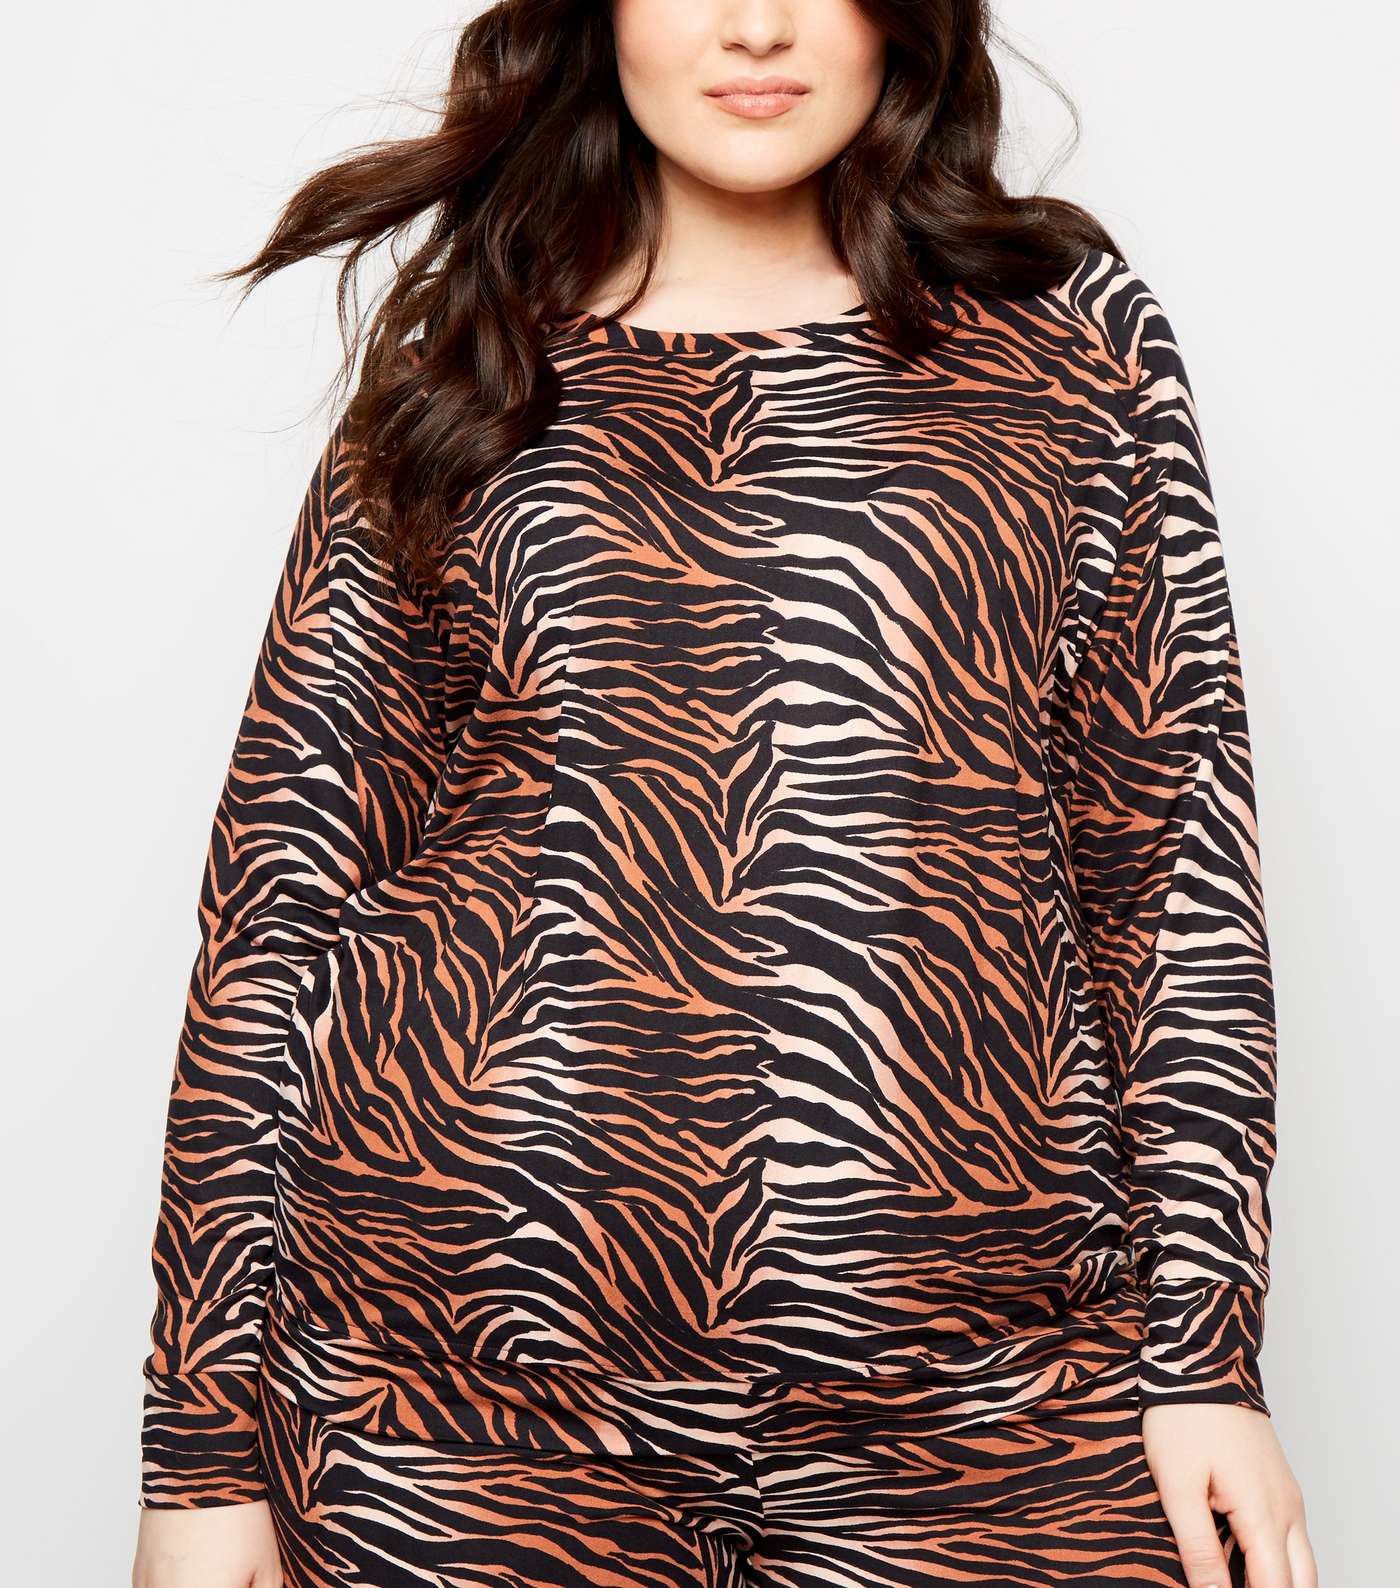 Curves Brown Tiger Print Soft Touch Sweatshirt